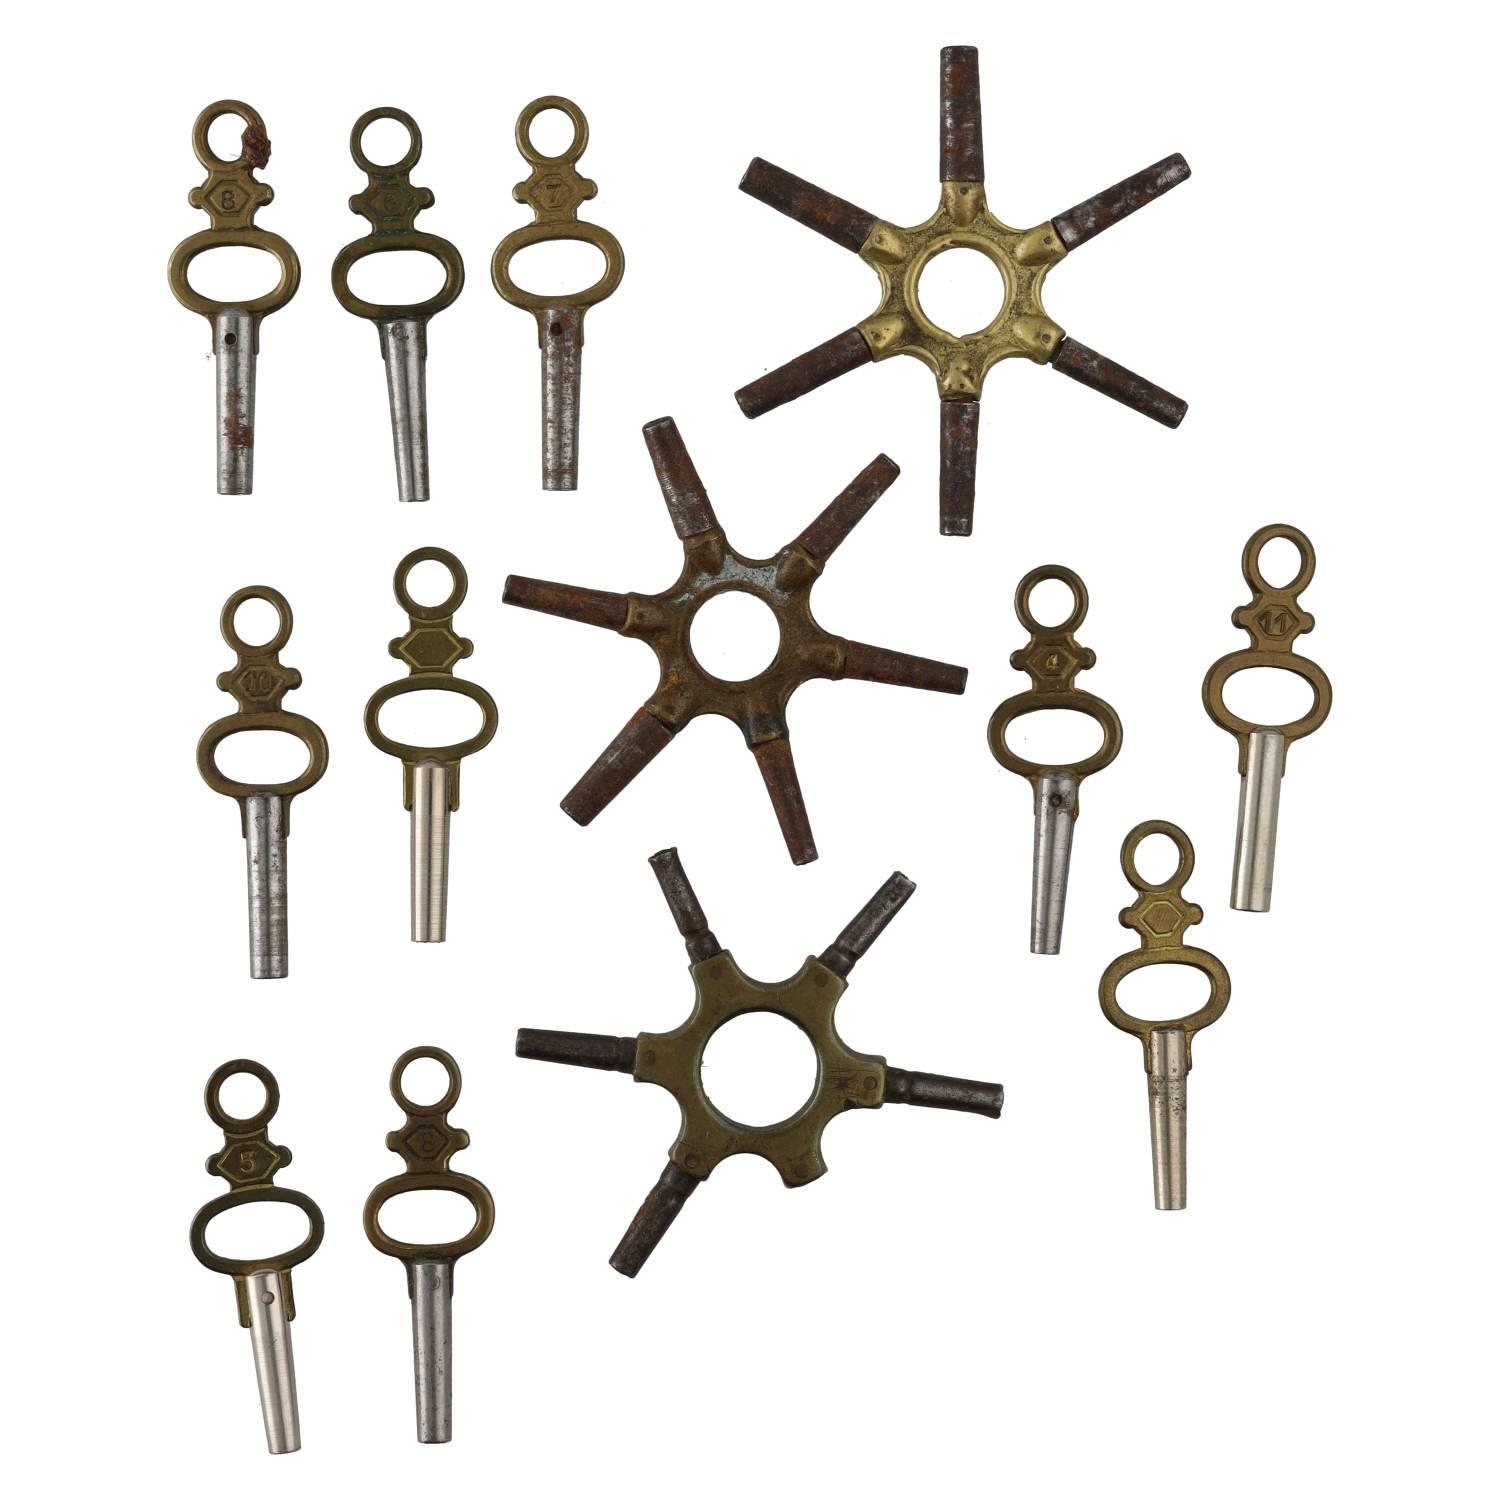 Two spider pocket watch keys; together with a part spider pocket watch key and ten pocket watch keys